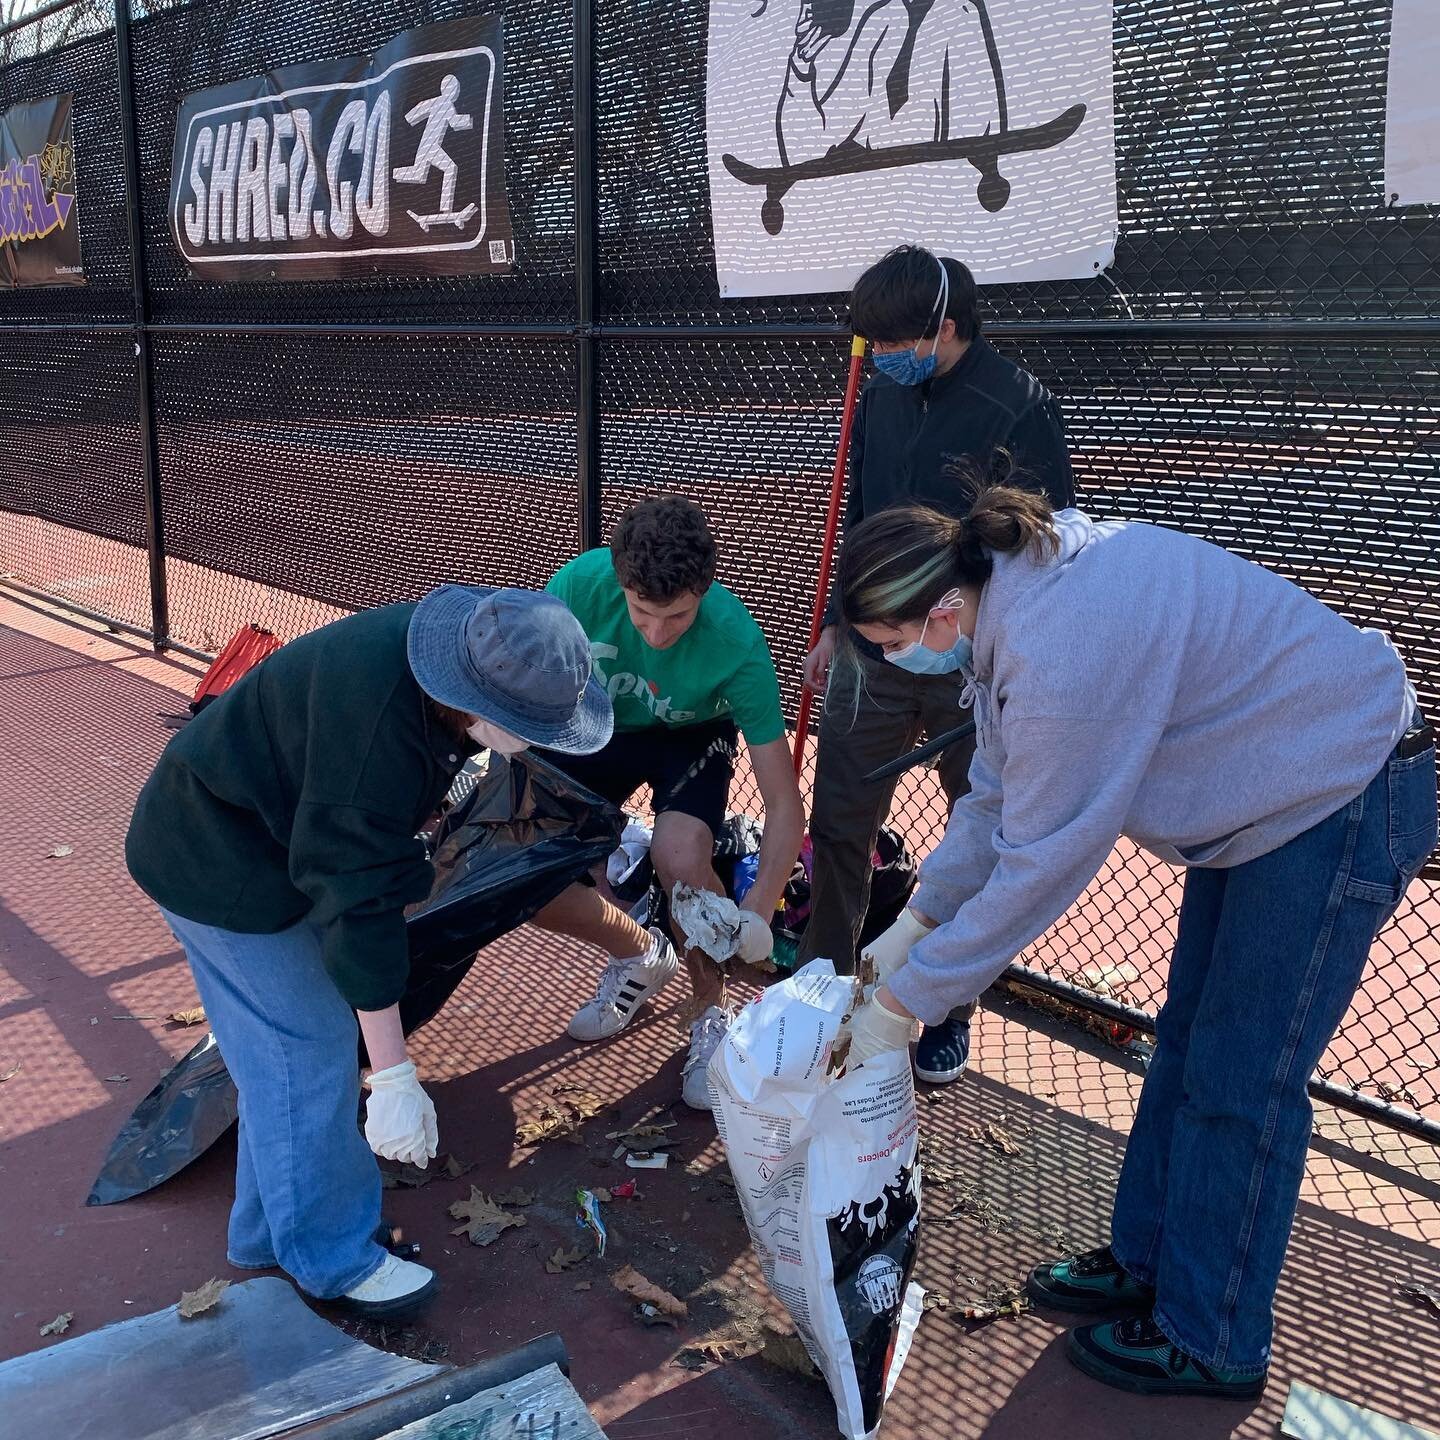 Thank you volunteers for the great job today cleaning up the Courts Skatepark at Rand Park.  Great Community Effort @mhs_skateclub @shred.co @boardroomskate @unofficial.skate @councilmanyacobellis @courtskatepark #montclairnj #montclair